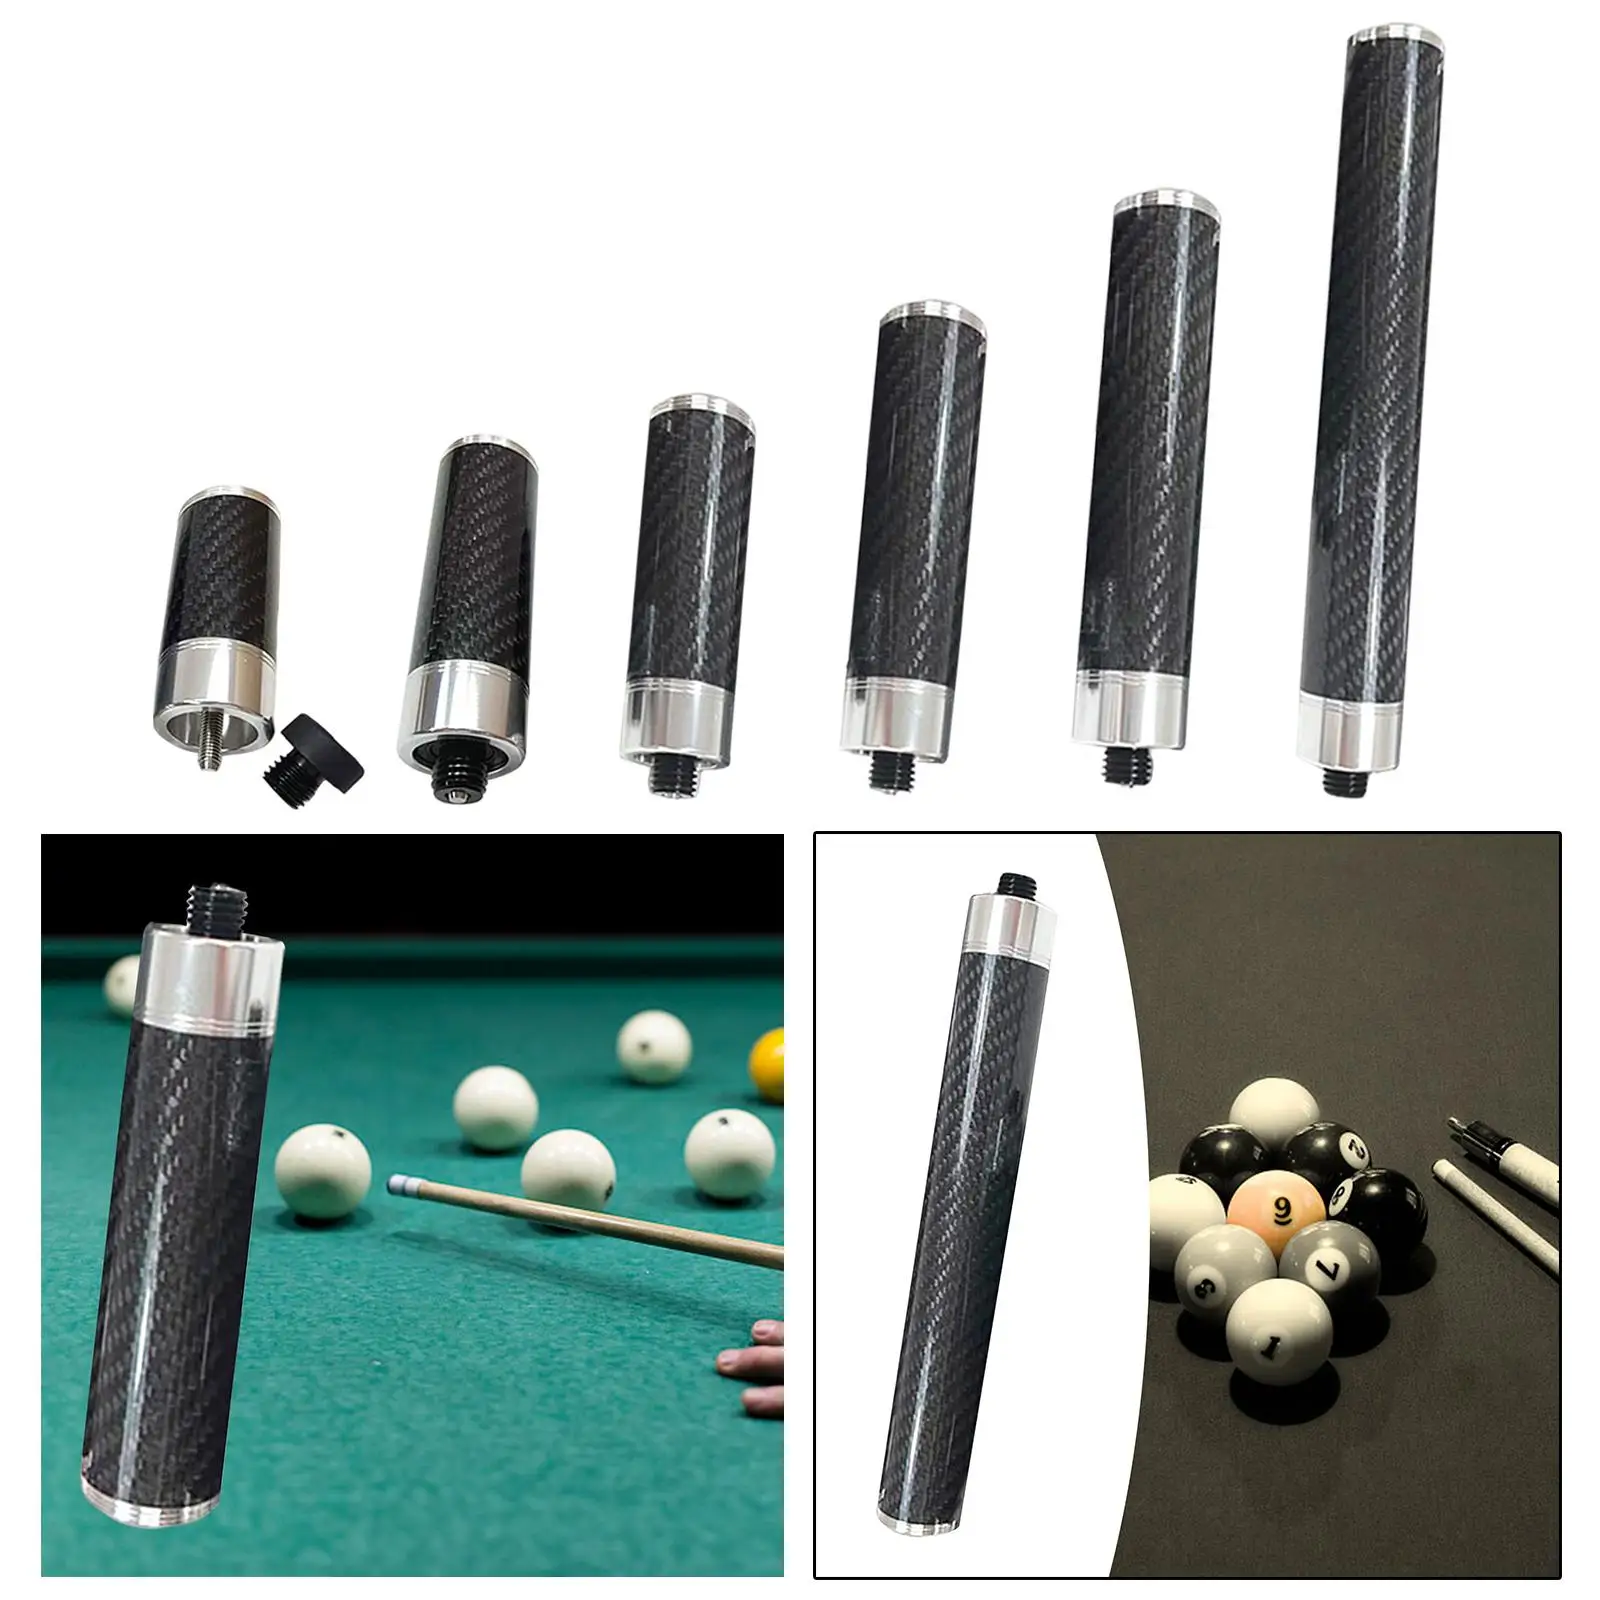 Billiards Pool Cue Extension with Back Cap Compact Billiard Connect Shaft